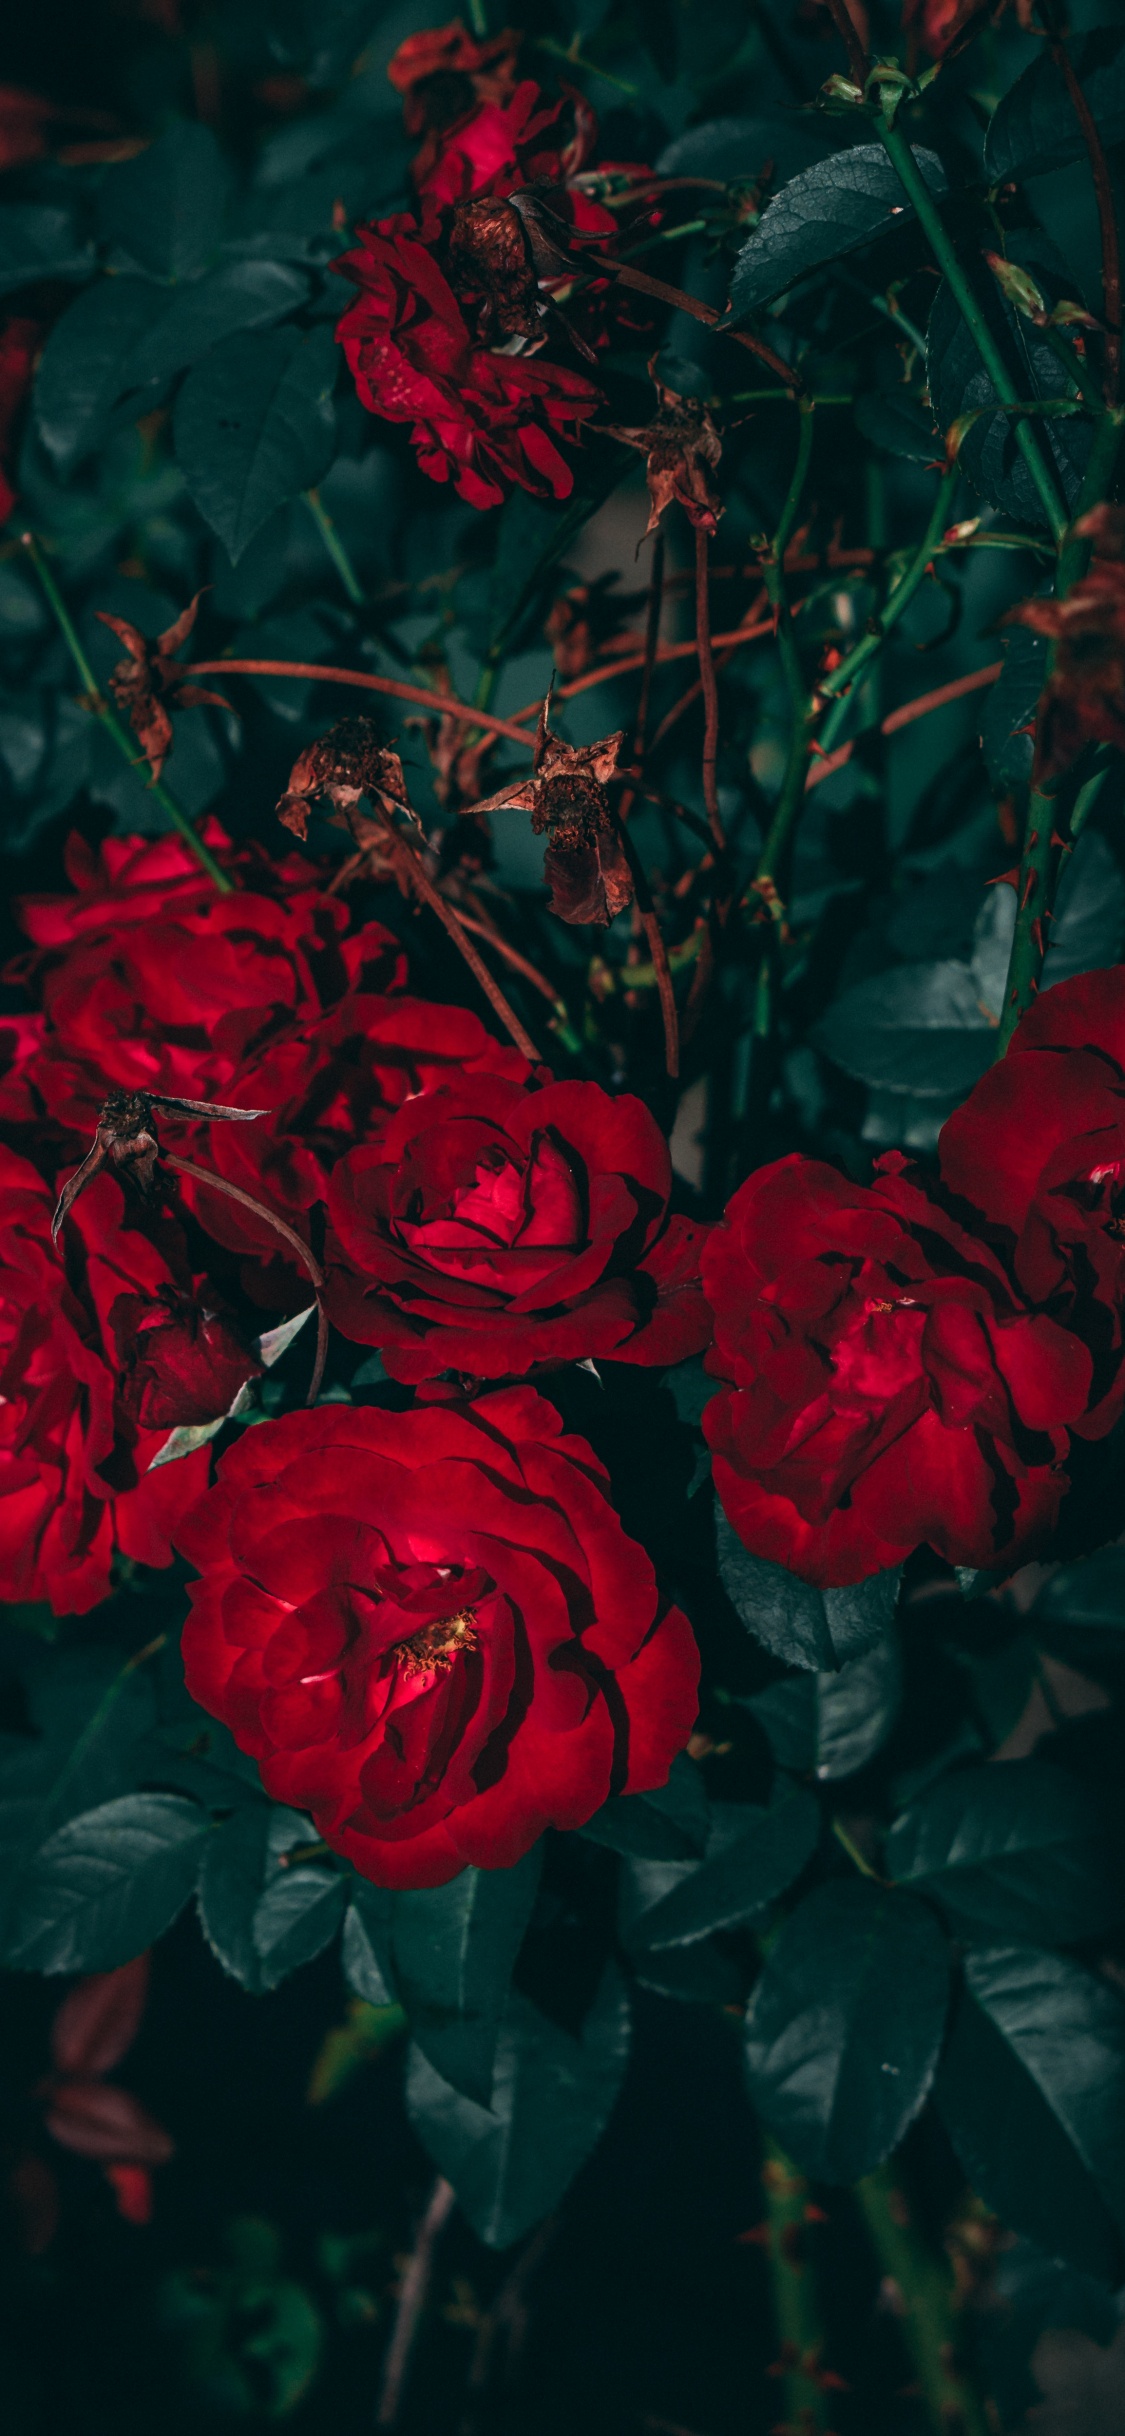 Roses Rouges en Photographie Rapprochée. Wallpaper in 1125x2436 Resolution